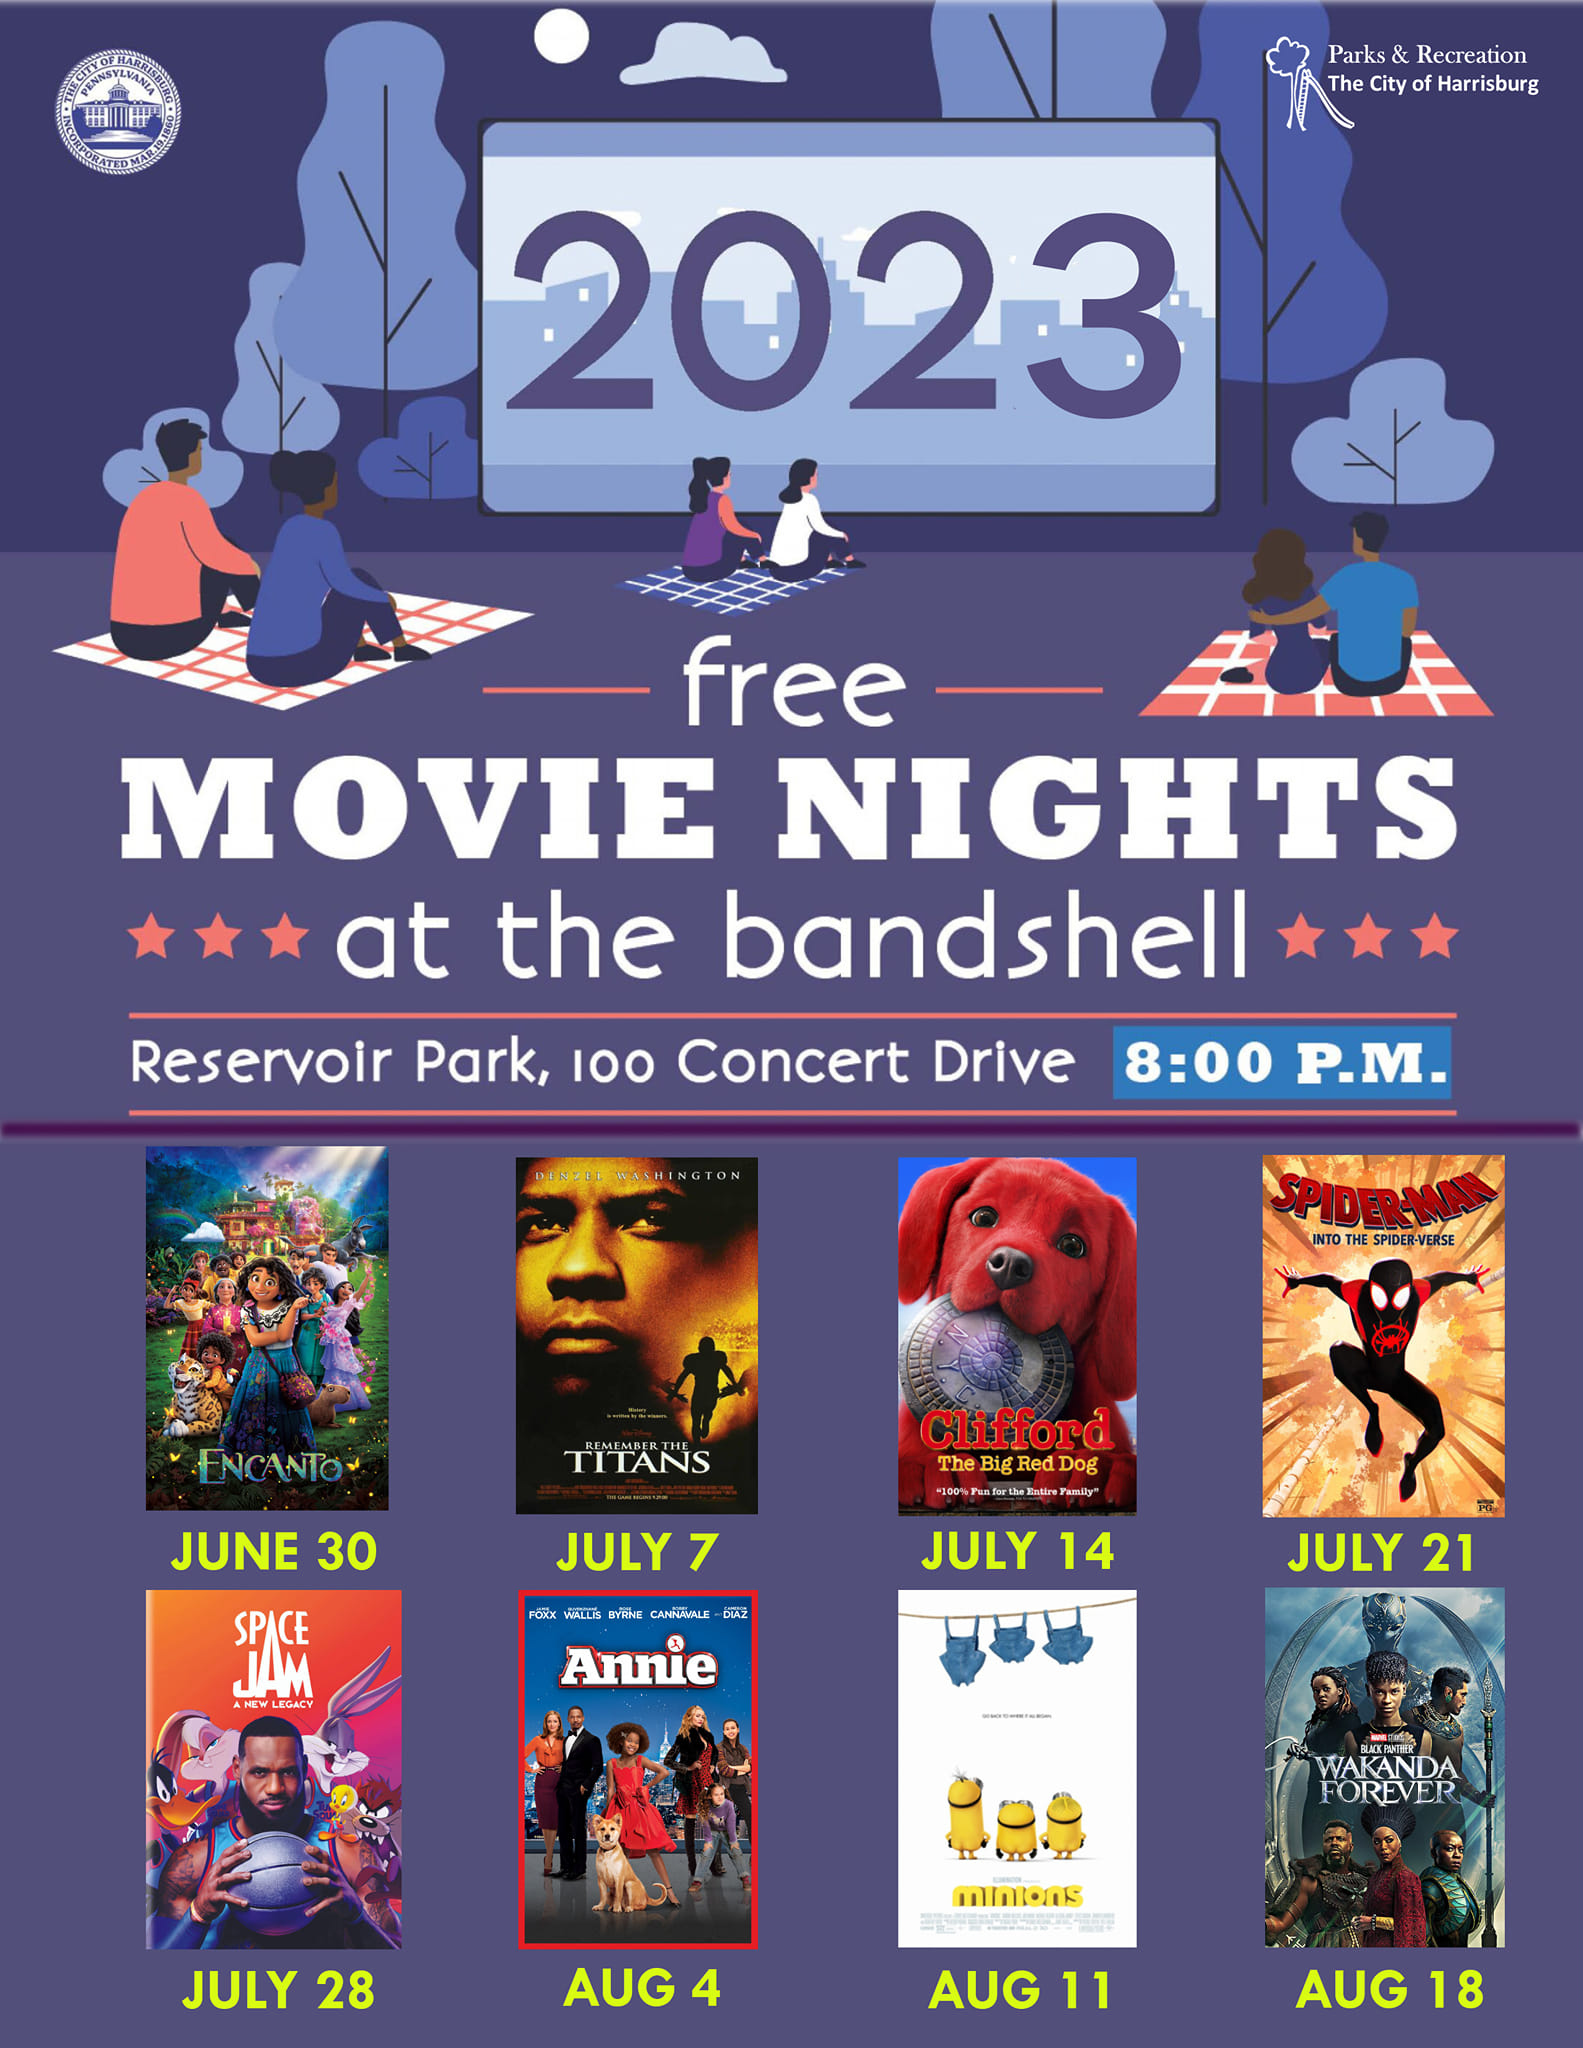 movied in the park flyer